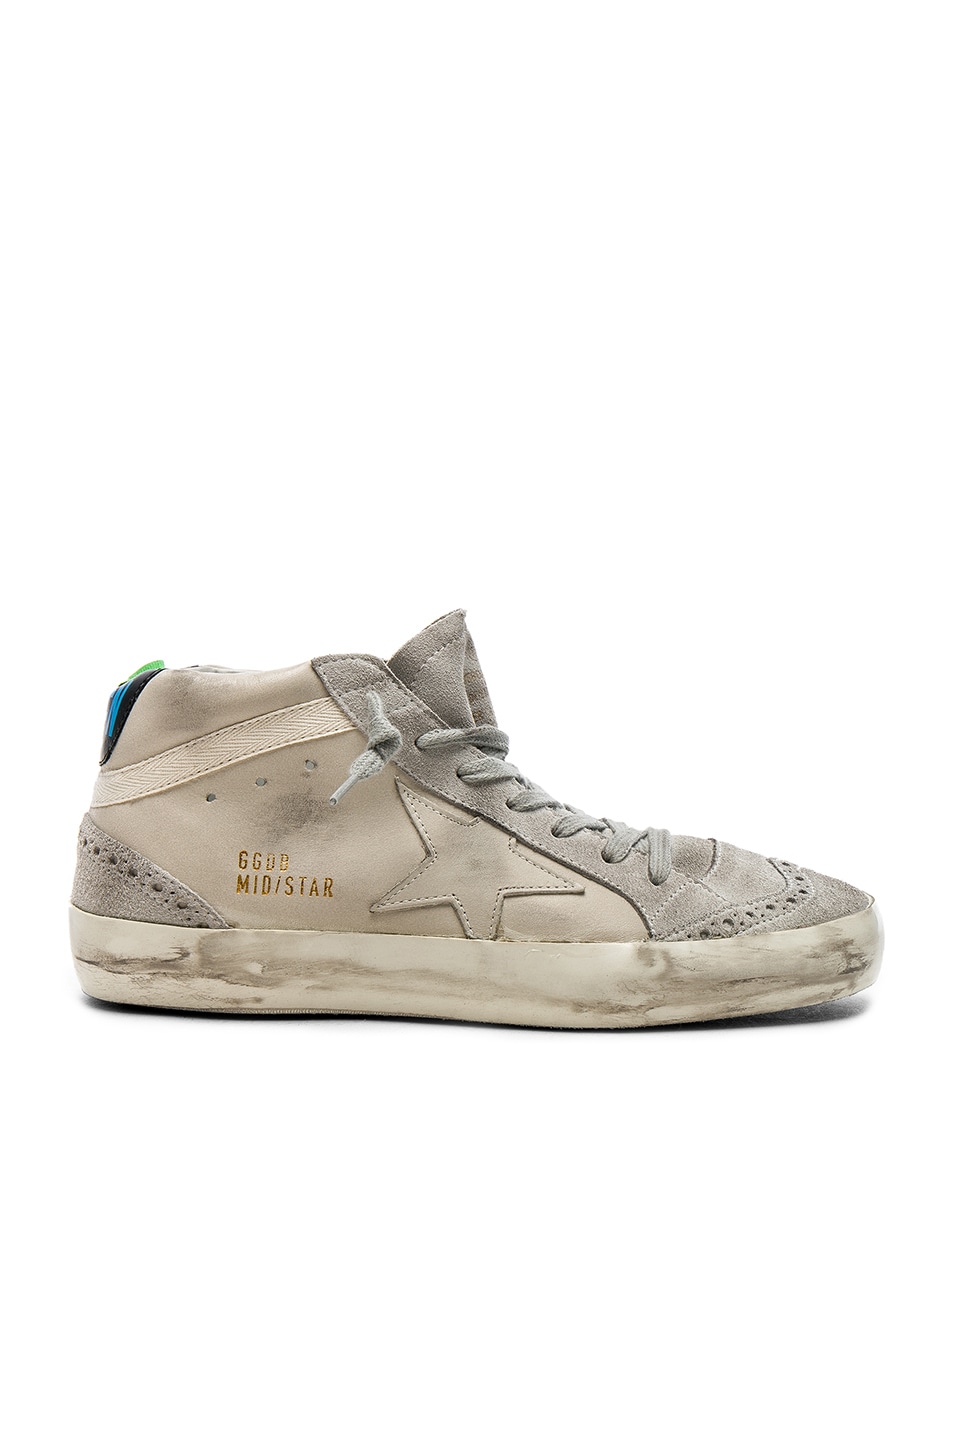 Image 1 of Golden Goose Leather Mid Star Sneakers in White Leather